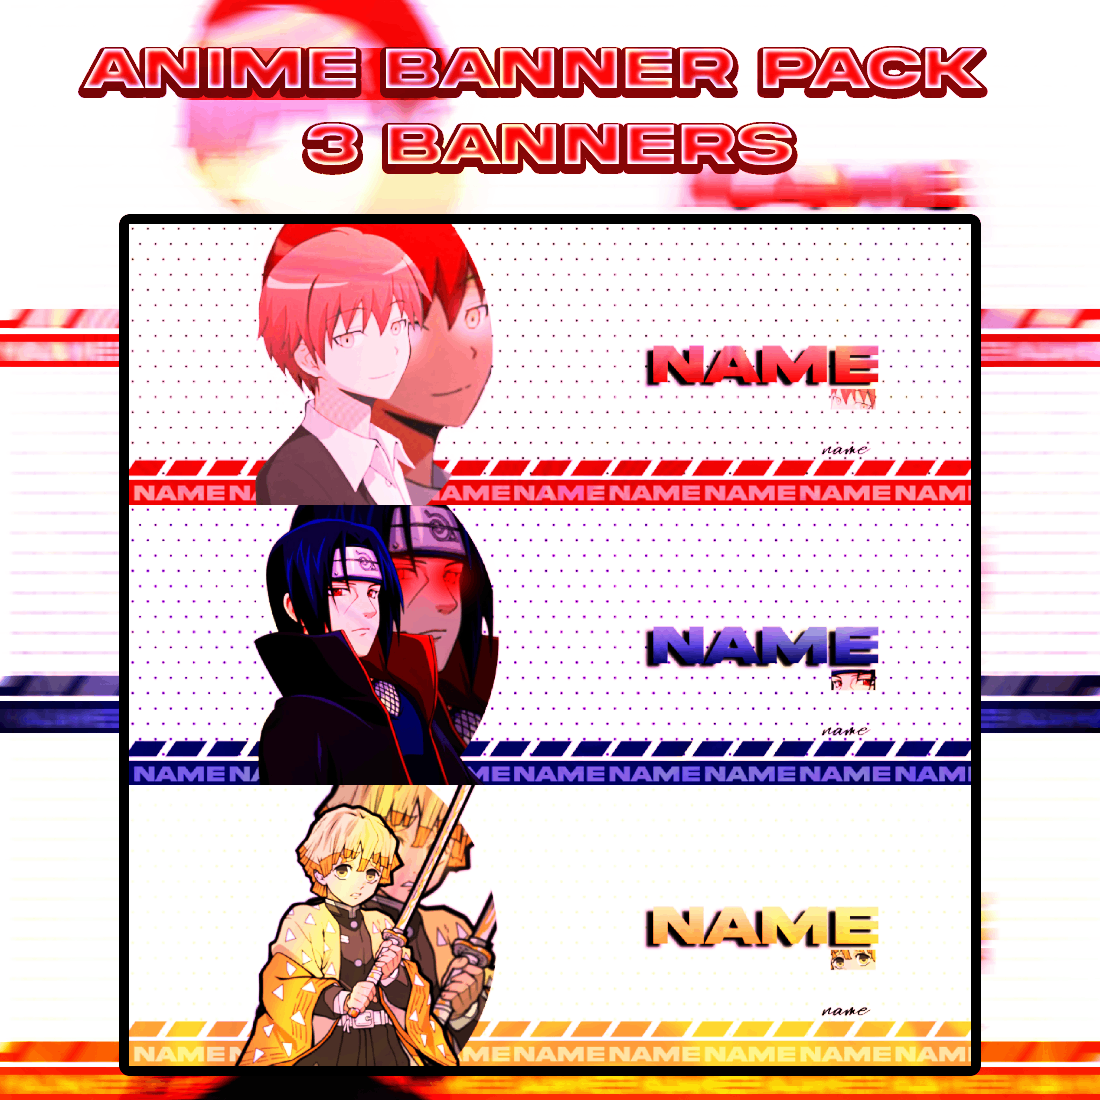 Anime Banner Pack (3 Editable Banners) main cover.